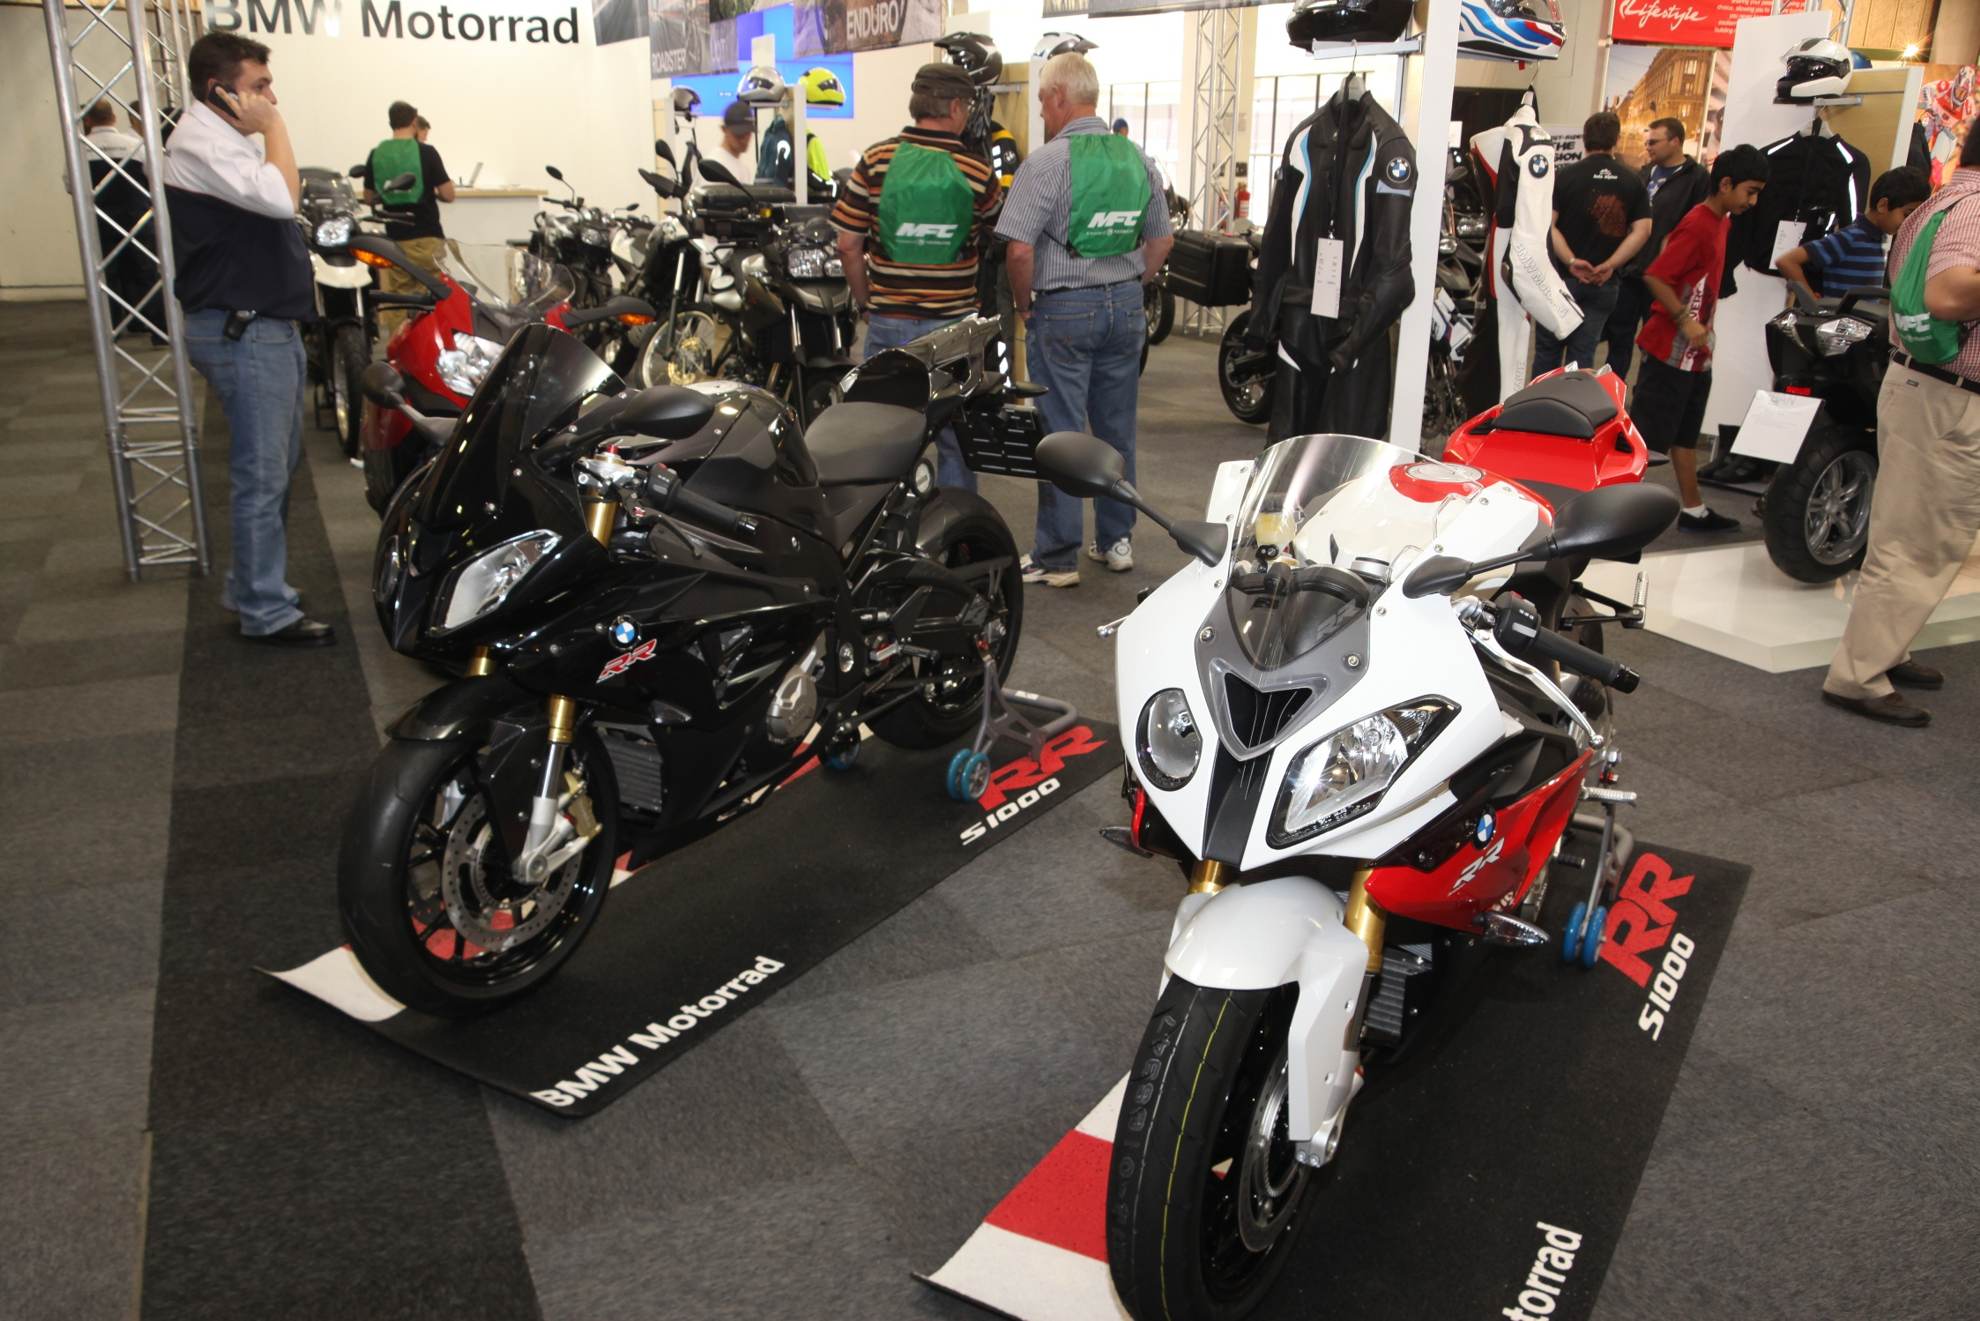 Amid Motorcycle Show